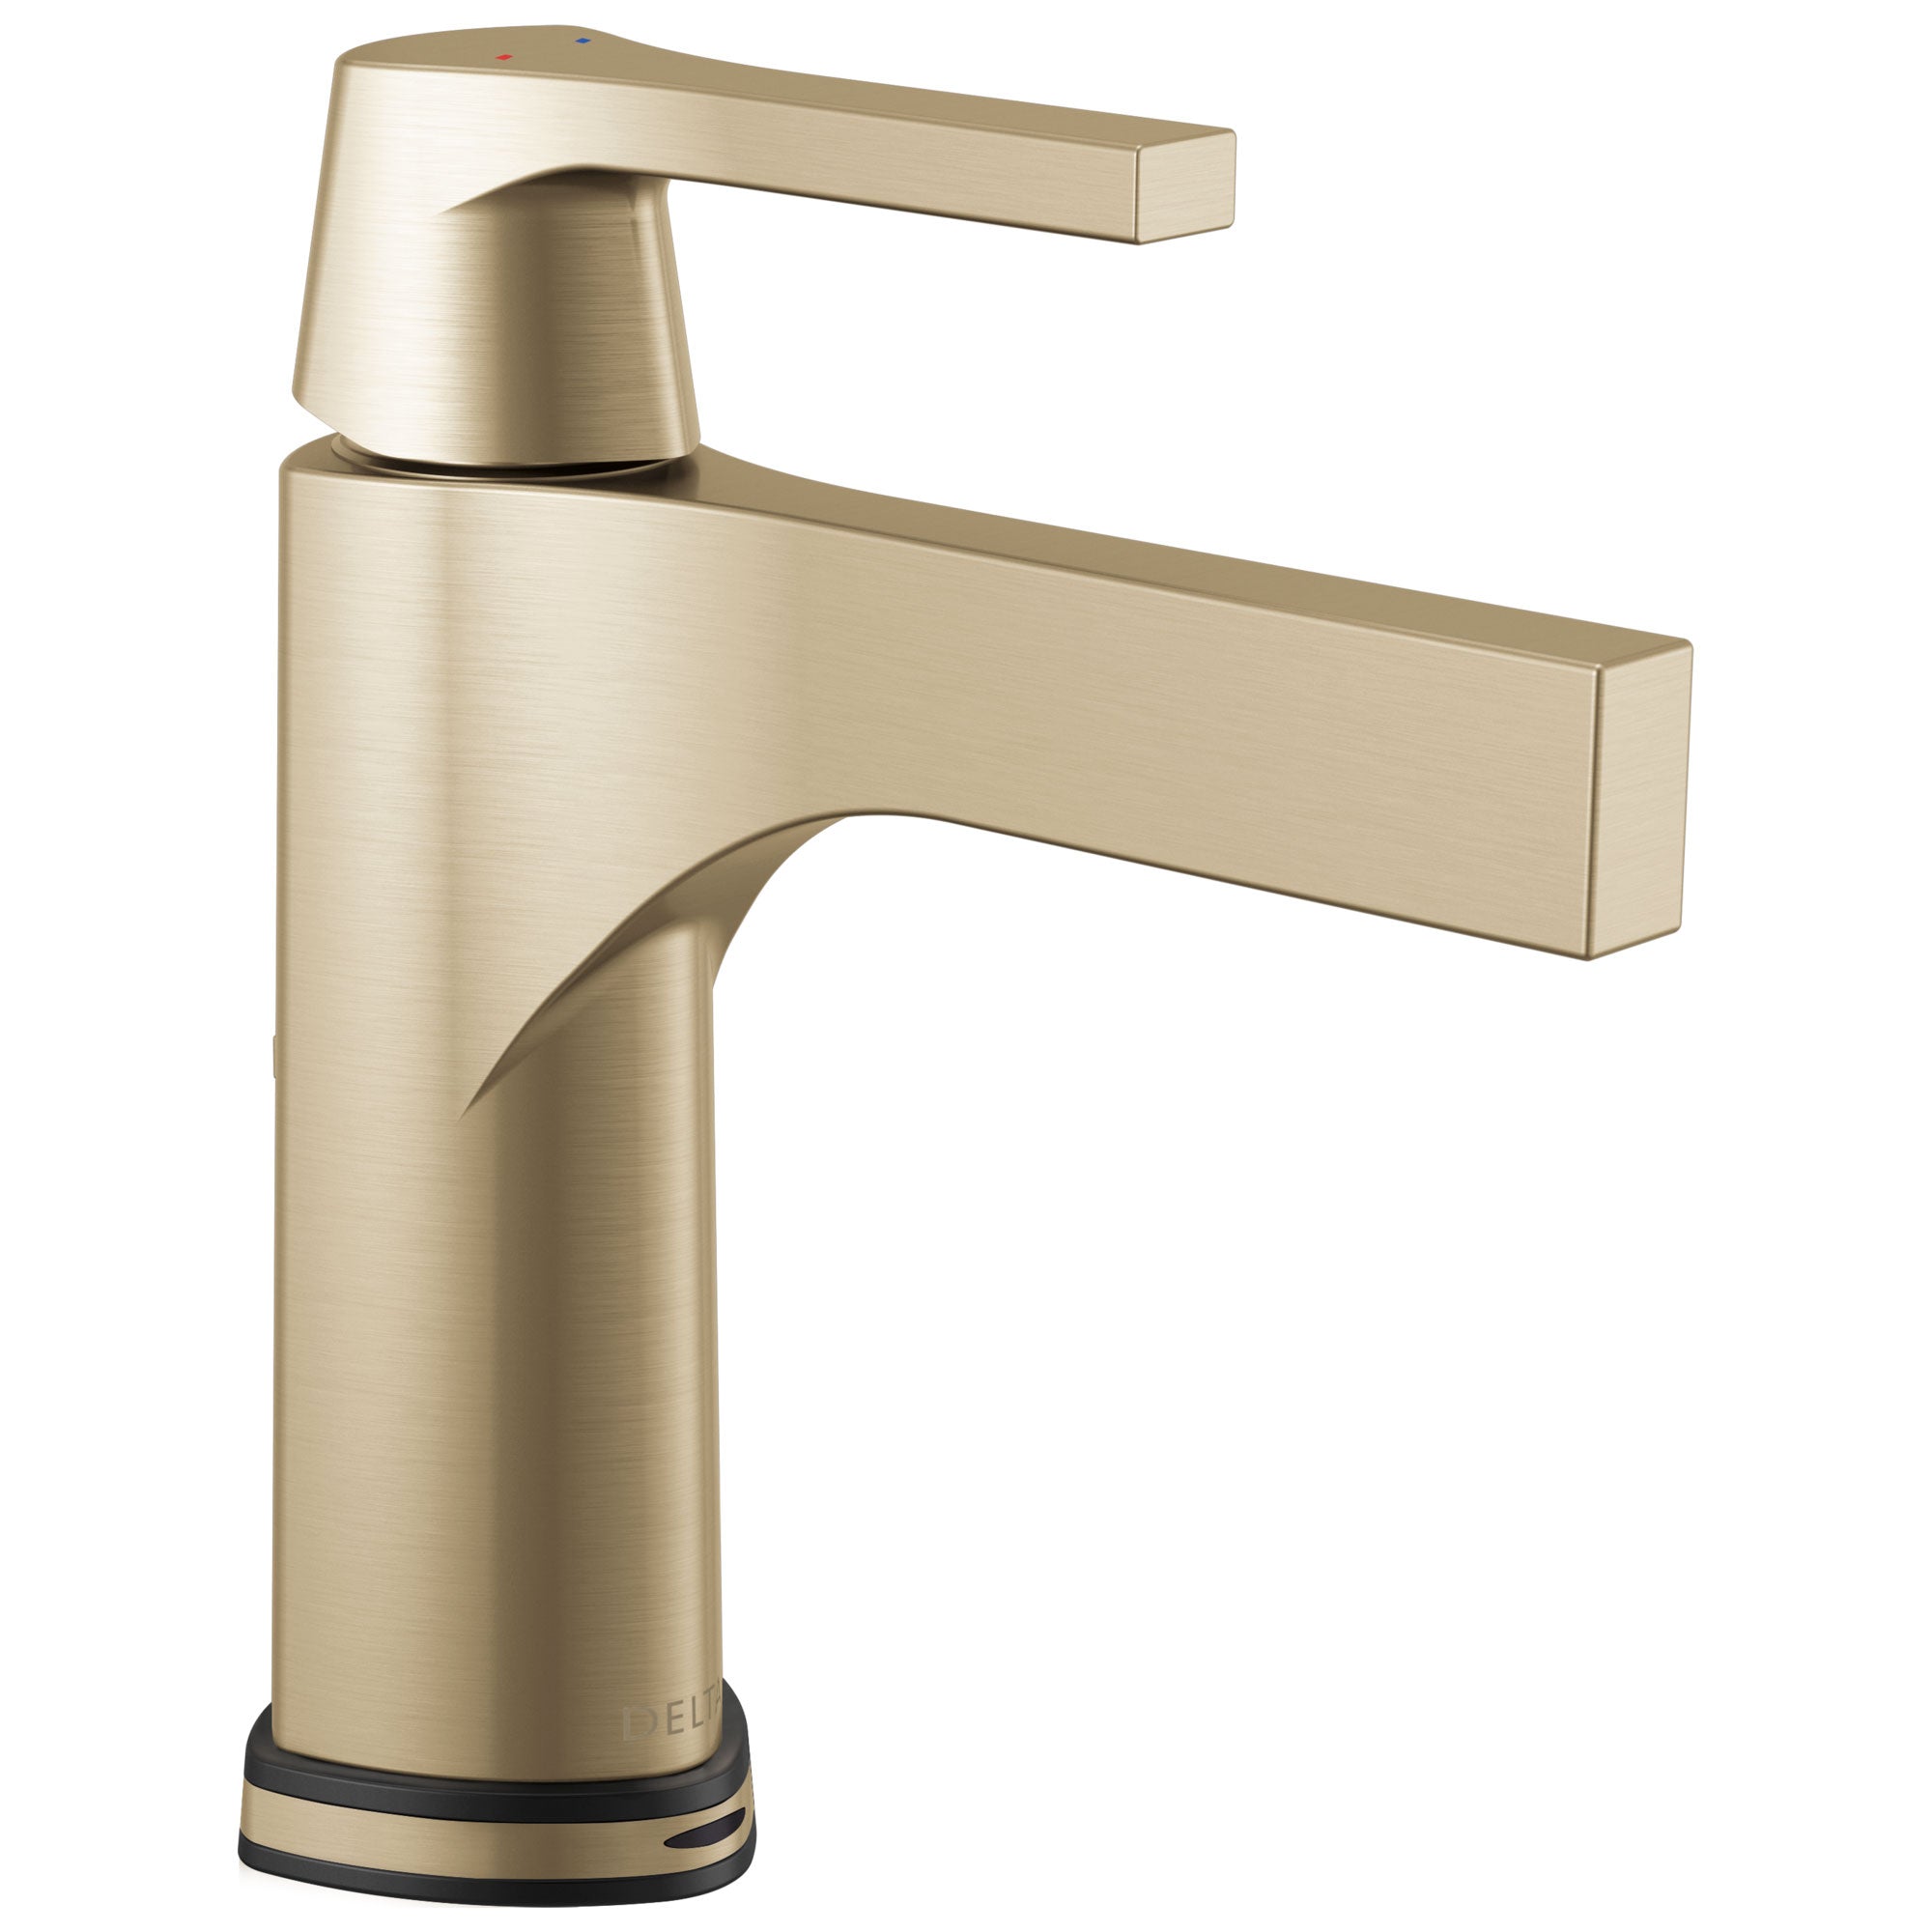 Delta Zura Champagne Bronze Finish Single Handle Bathroom Faucet with Touch2O.xt Technology D574TCZDST